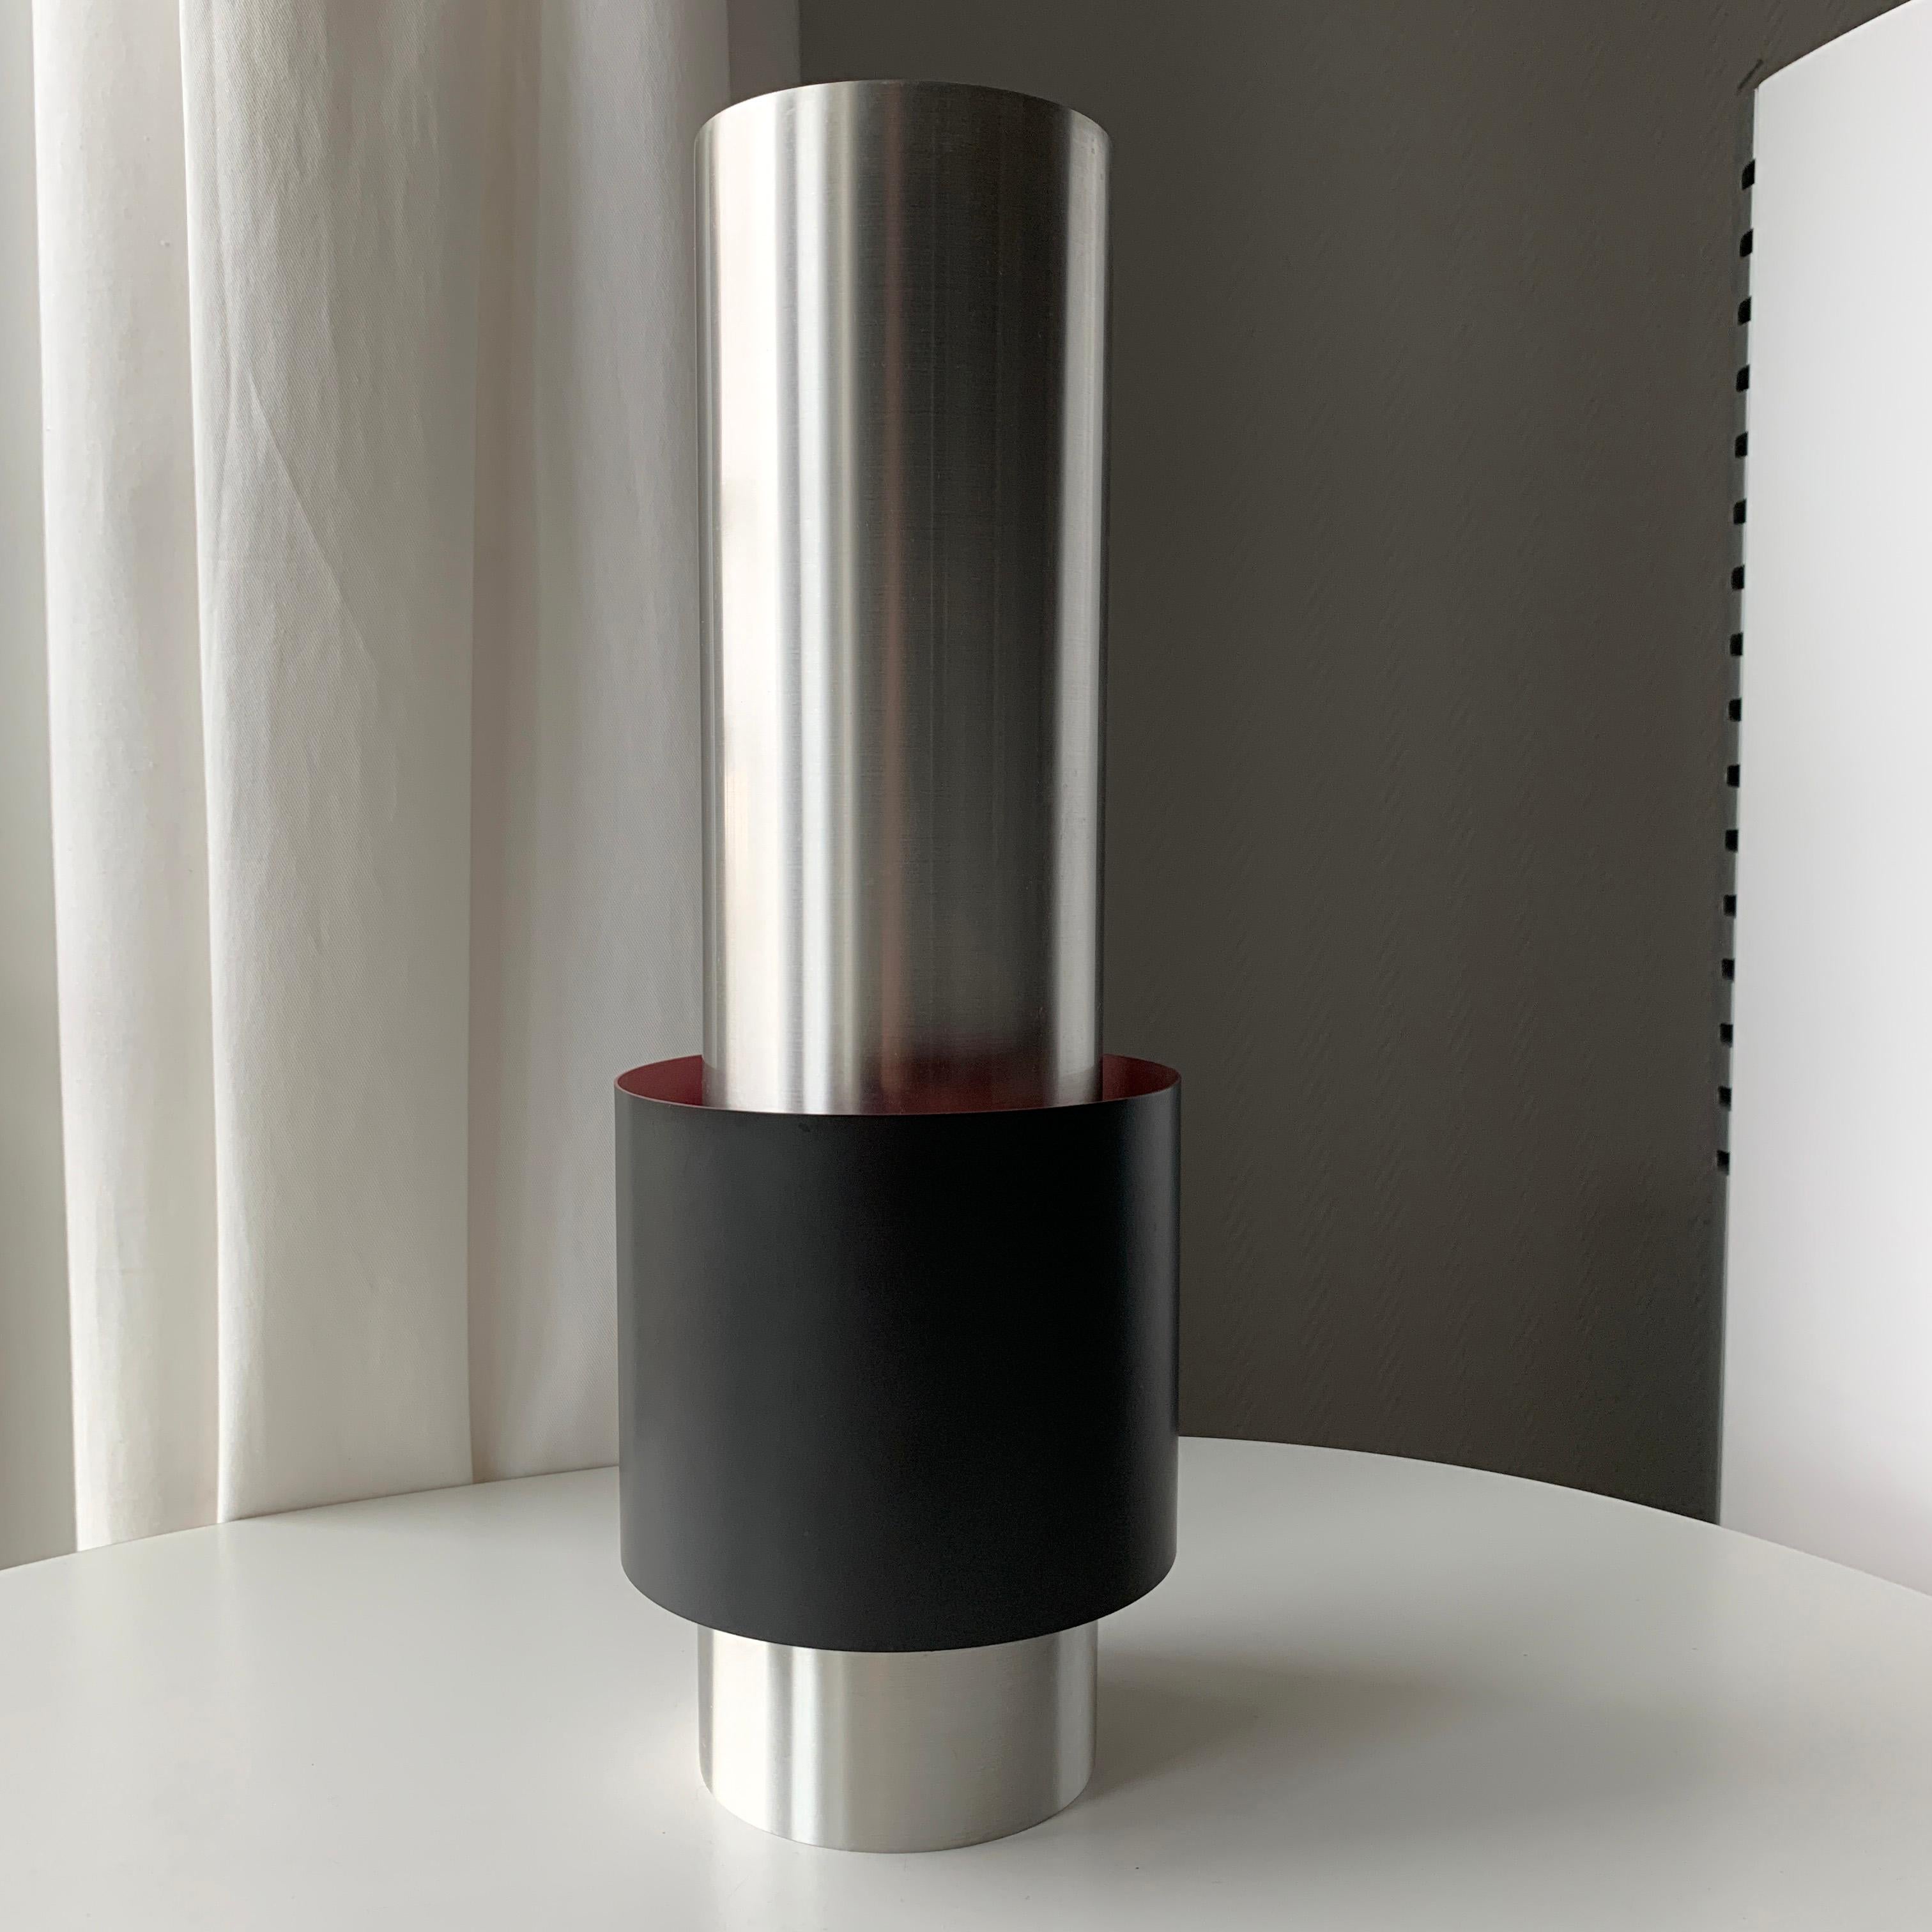 Jo Hammerborg model Zenith manufactured by Danish Fog & Mørup circa 1967. Tubular aluminum design with matte dark anthracite diffusor. Ruby red reflection surface inside tube to emit a warm amience of light. E27 bulb socket holder. Mounted with